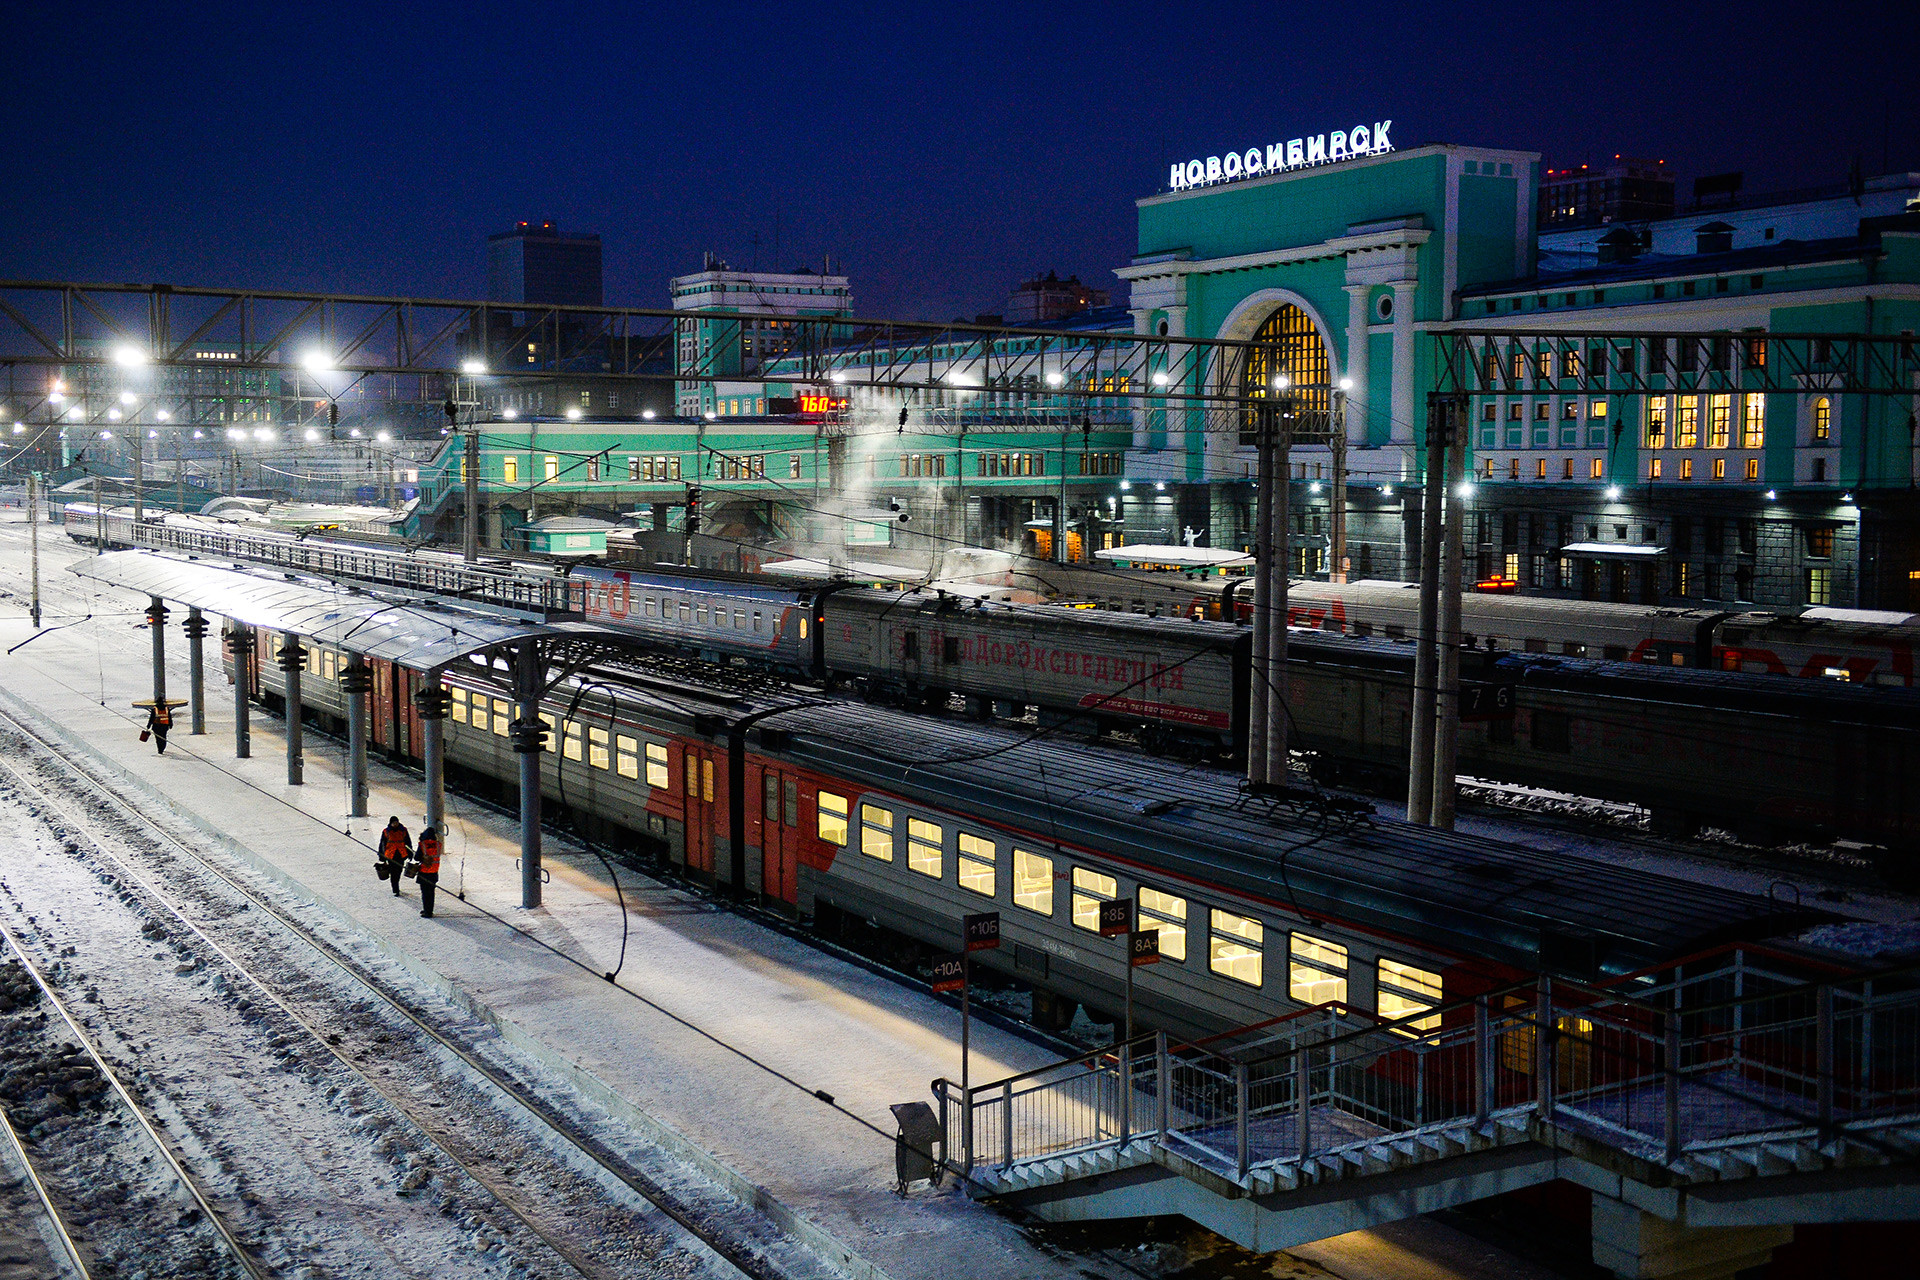 Most Siberians believe that the capital of Russia should be moved to Siberia. 